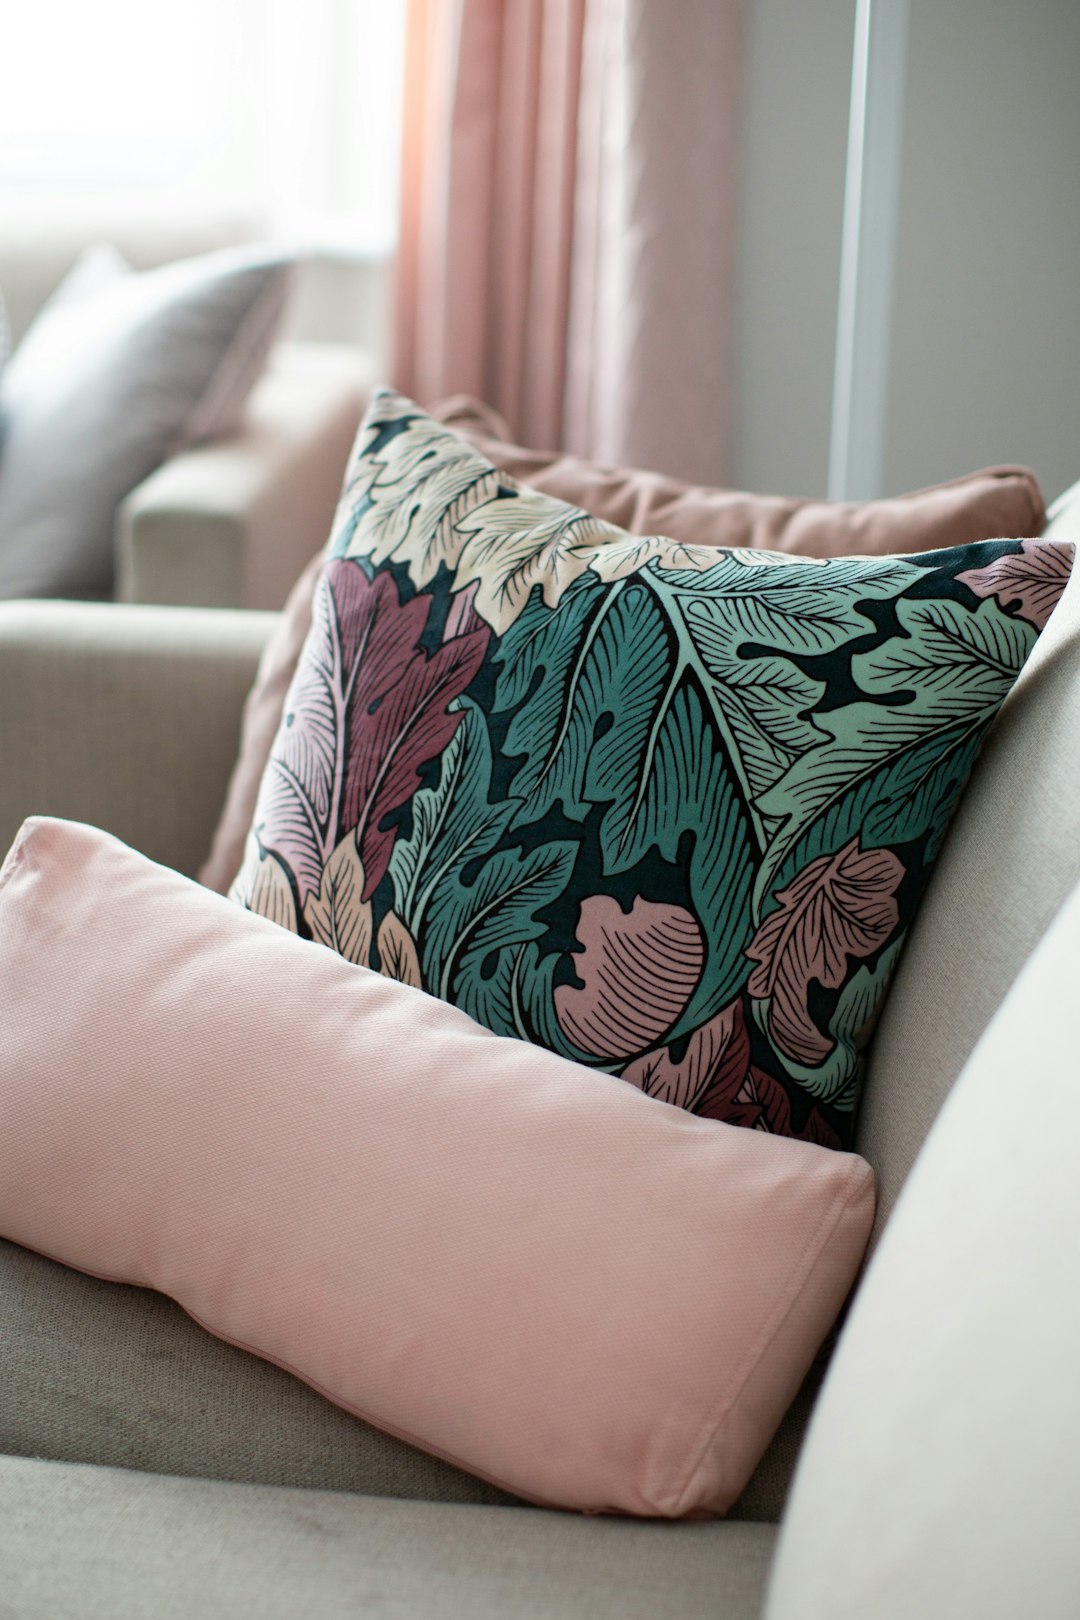  white and green floral throw pillow on pink couch cushion